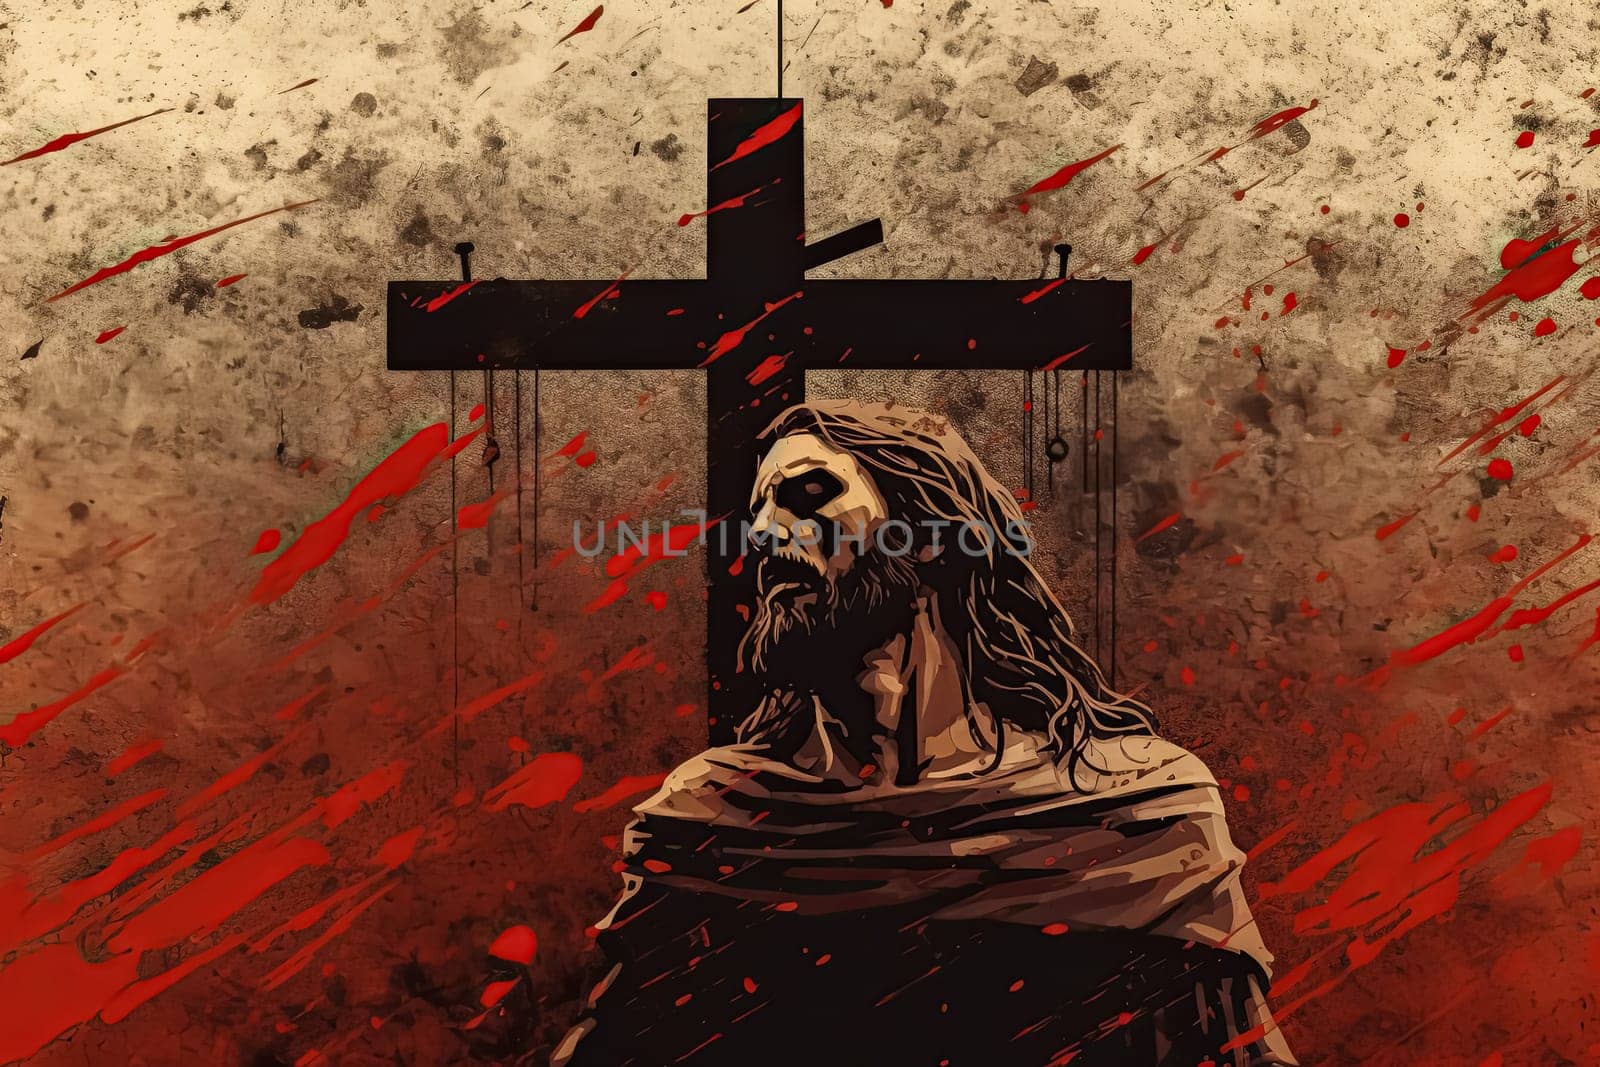 A painting of Jesus Christ on a cross. The painting has a dark and moody atmosphere, with the sun in the background and mountains in the distance